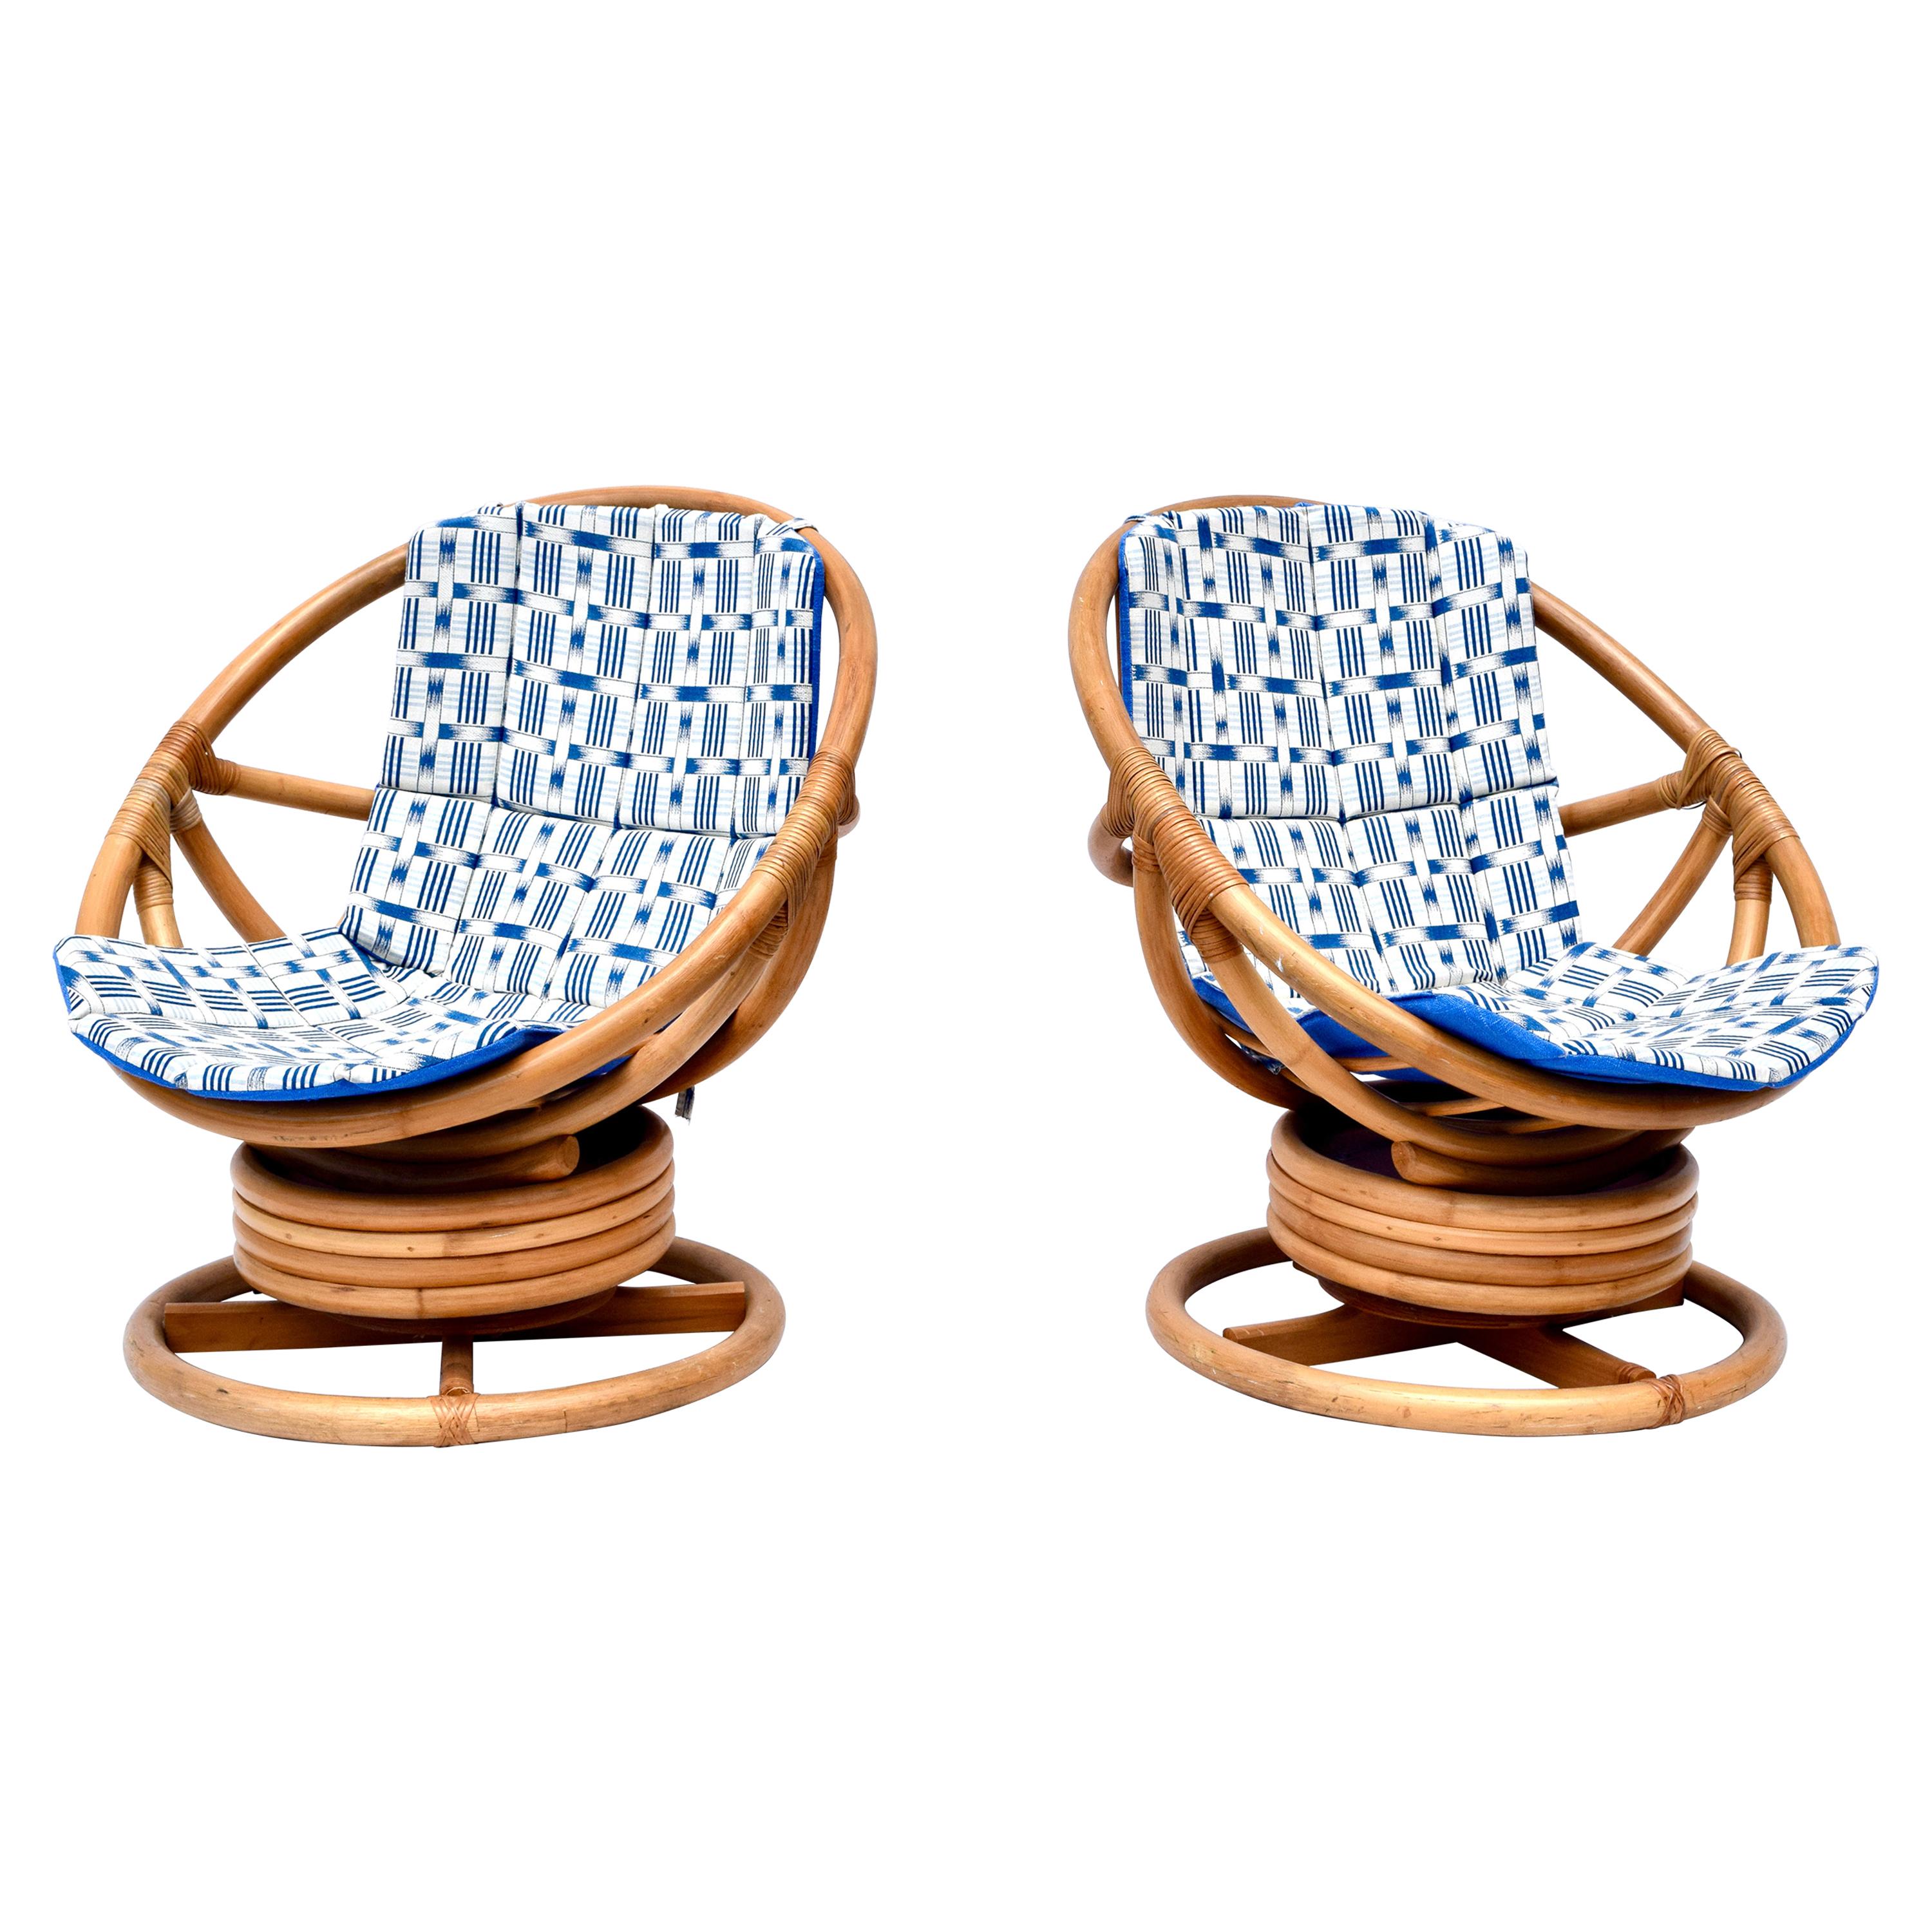 Pair of Saucer Form Swivel Lounge Bamboo Rattan Chairs, circa 1970s